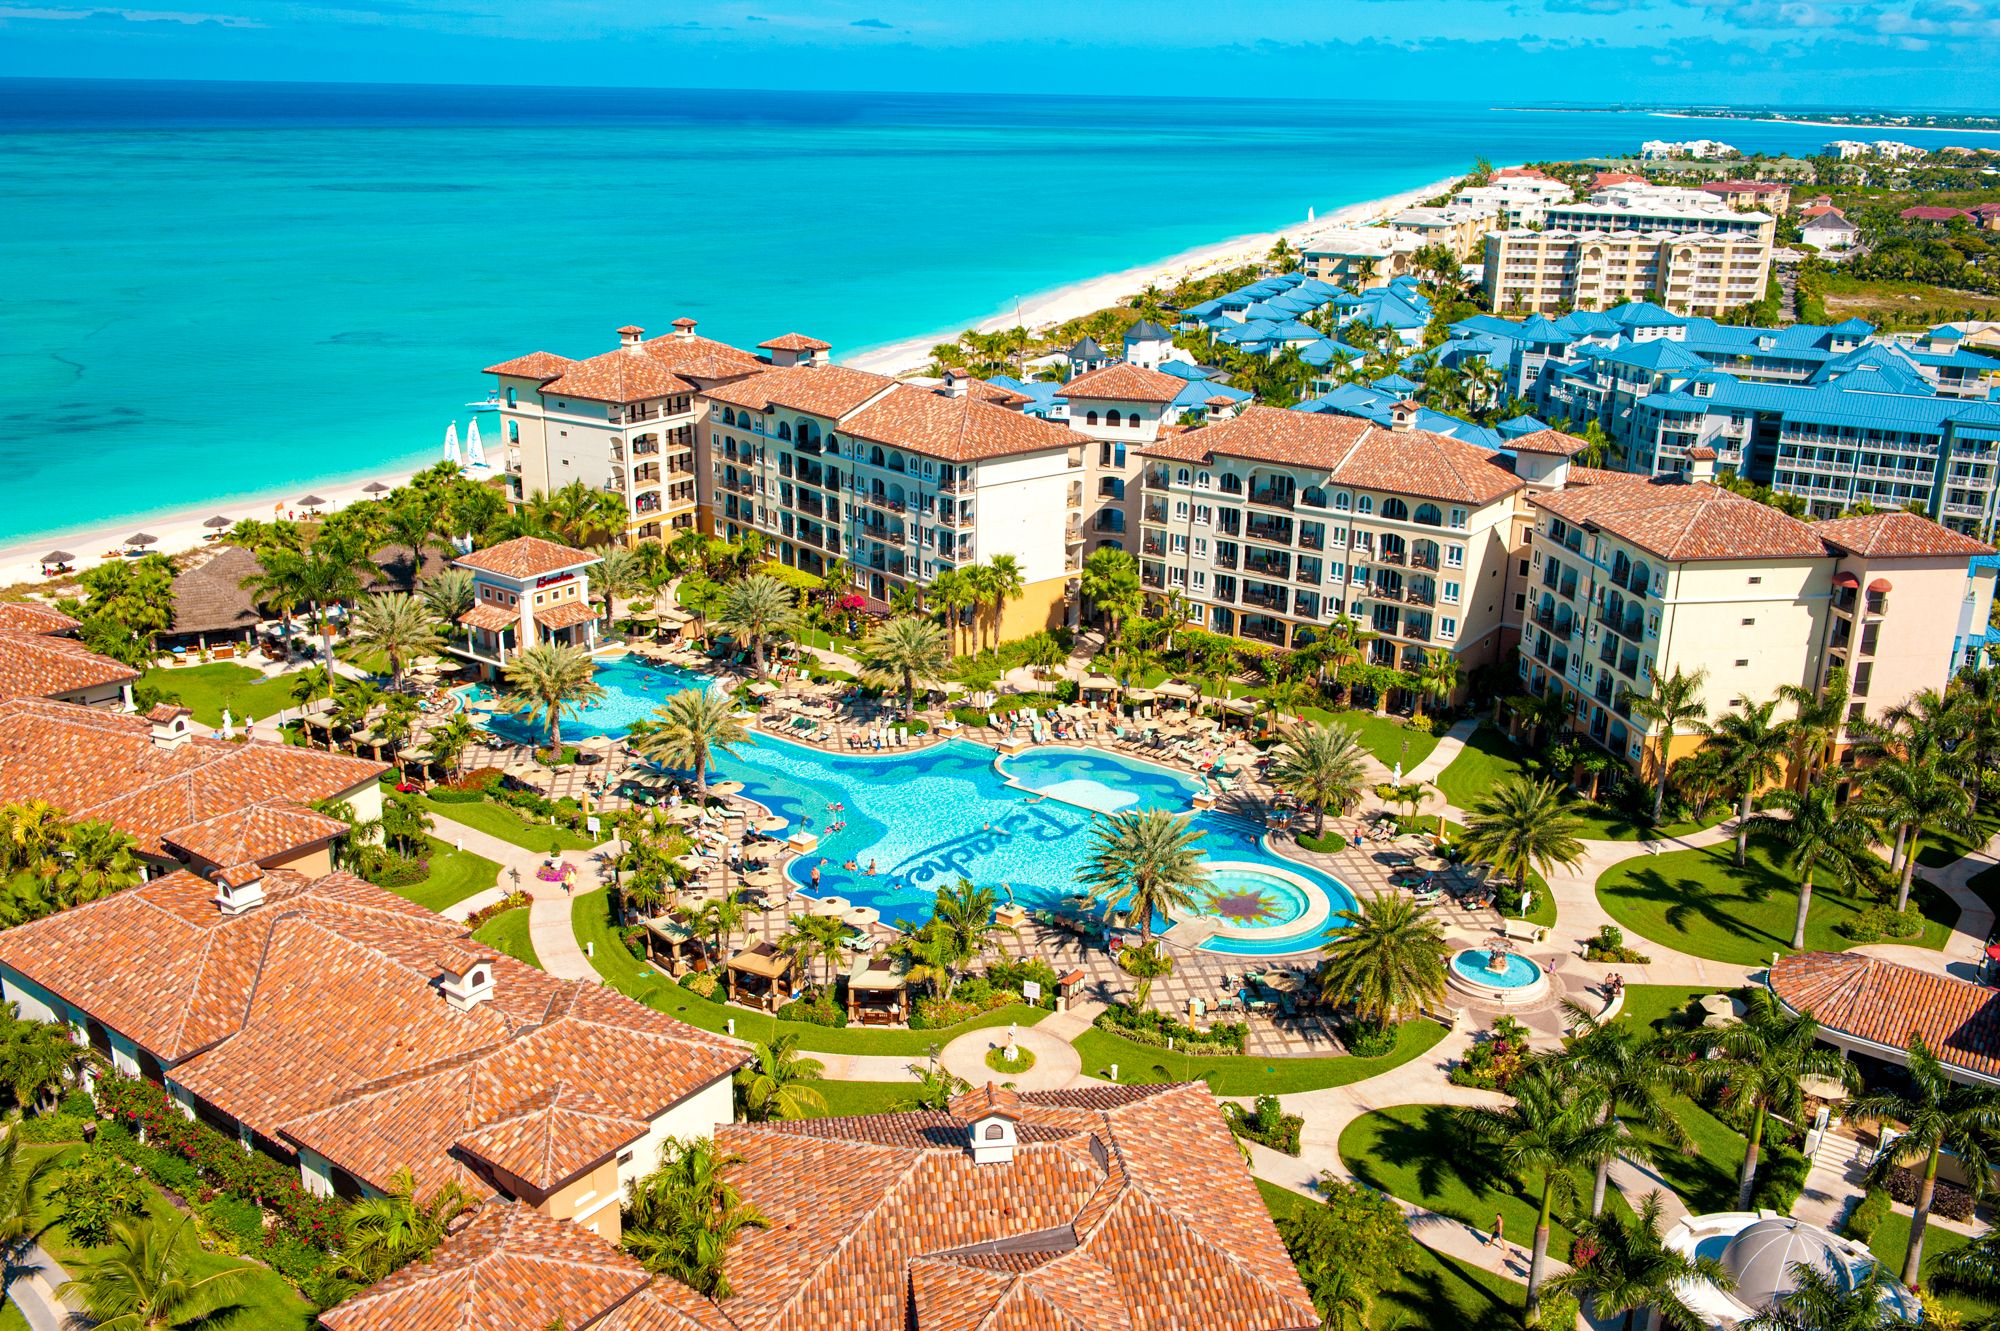 Beaches Turks Caicos Overview